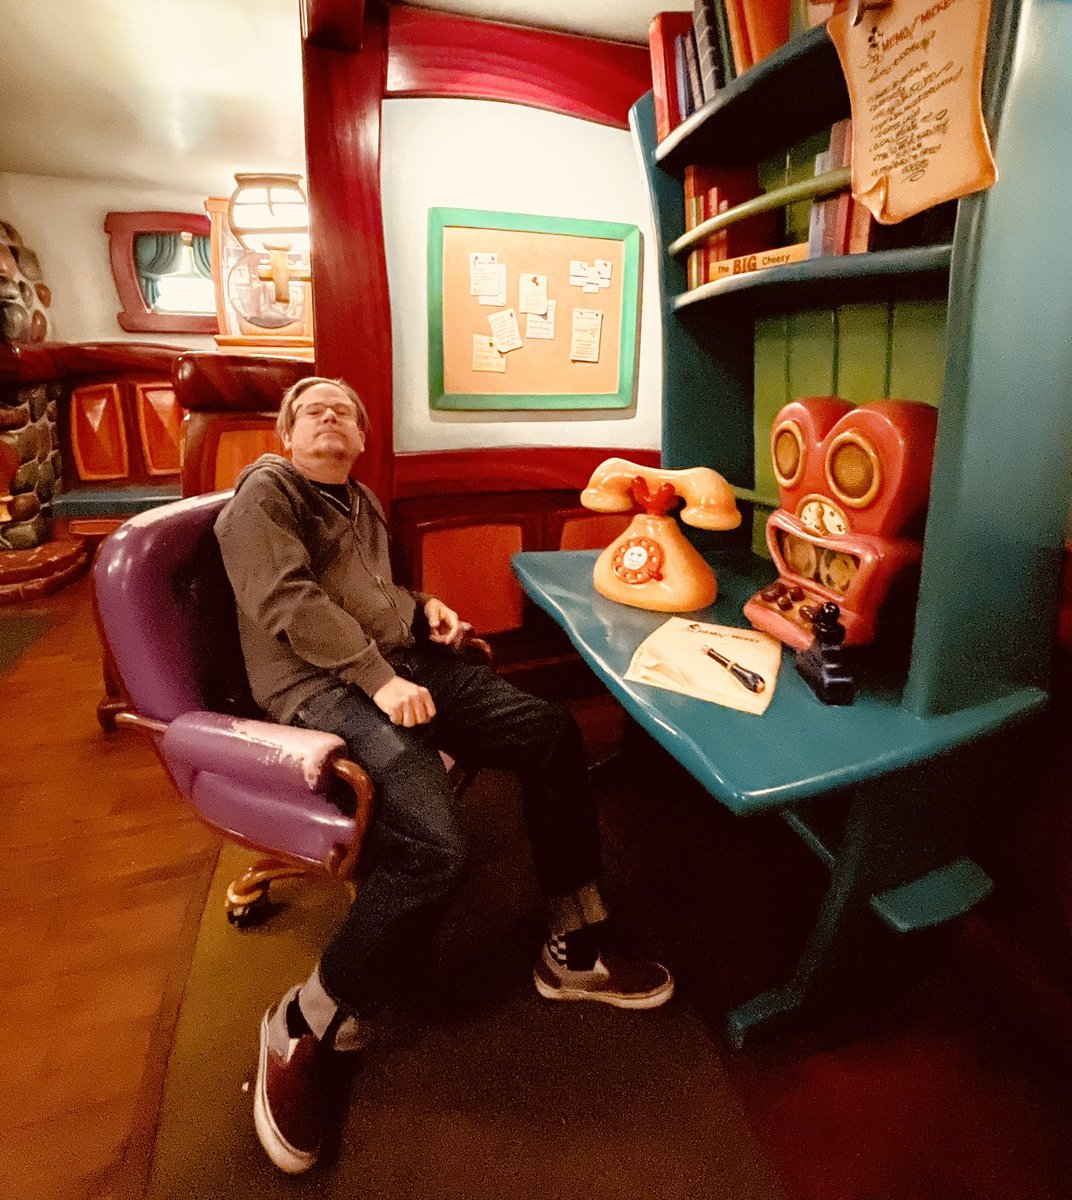 Mickey Mouse asked me to meet at his office to sign paperwork - “Selling a House to a Mouse” DRE 01393337 @sothebysrealty @disneyland #realestate #mickeymouse #sircletheglobe #sirnewdev #Community